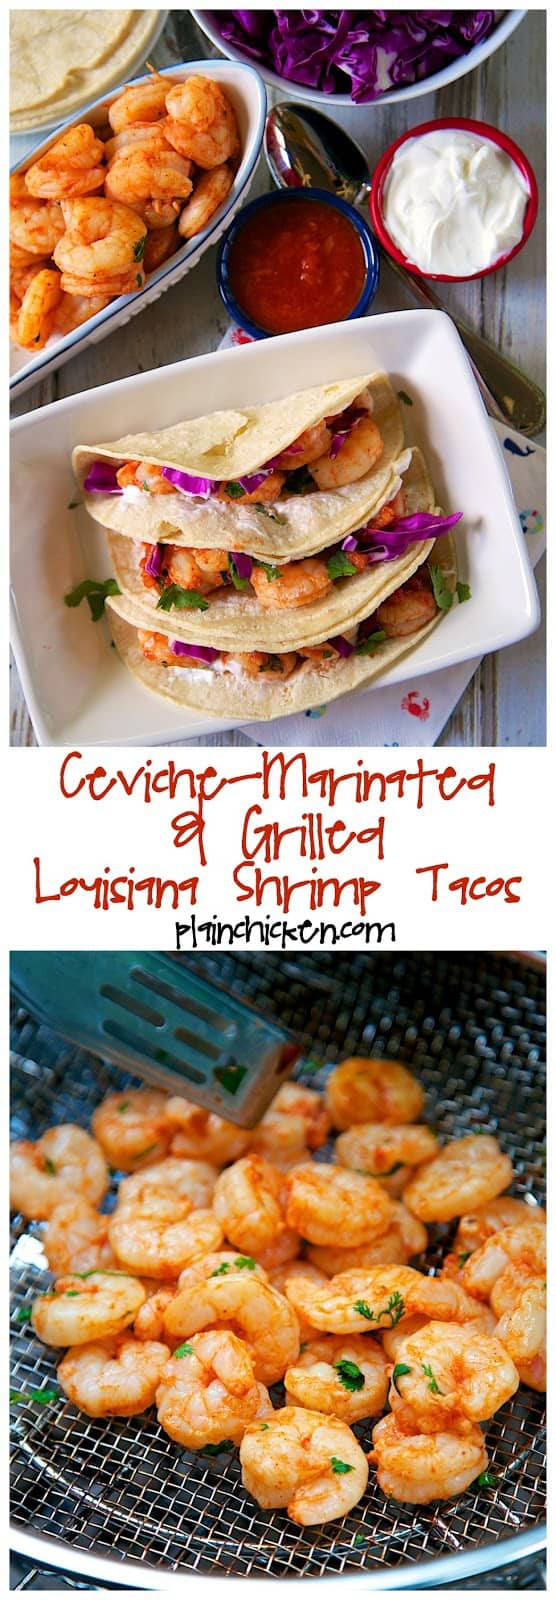 Ceviche-Marinated & Grilled Louisiana Shrimp Tacos Recipe - shrimp marinated in a mixture of tomato juice, lime juice, red onion, cilantro and chili powder. Marinate for 20 minutes and grill for 6 minutes to finish cooking. To assemble the tacos, we grilled a few corn tortillas and topped them with shrimp, sour cream, cabbage and salsa. SO good! Better than any restaurant!